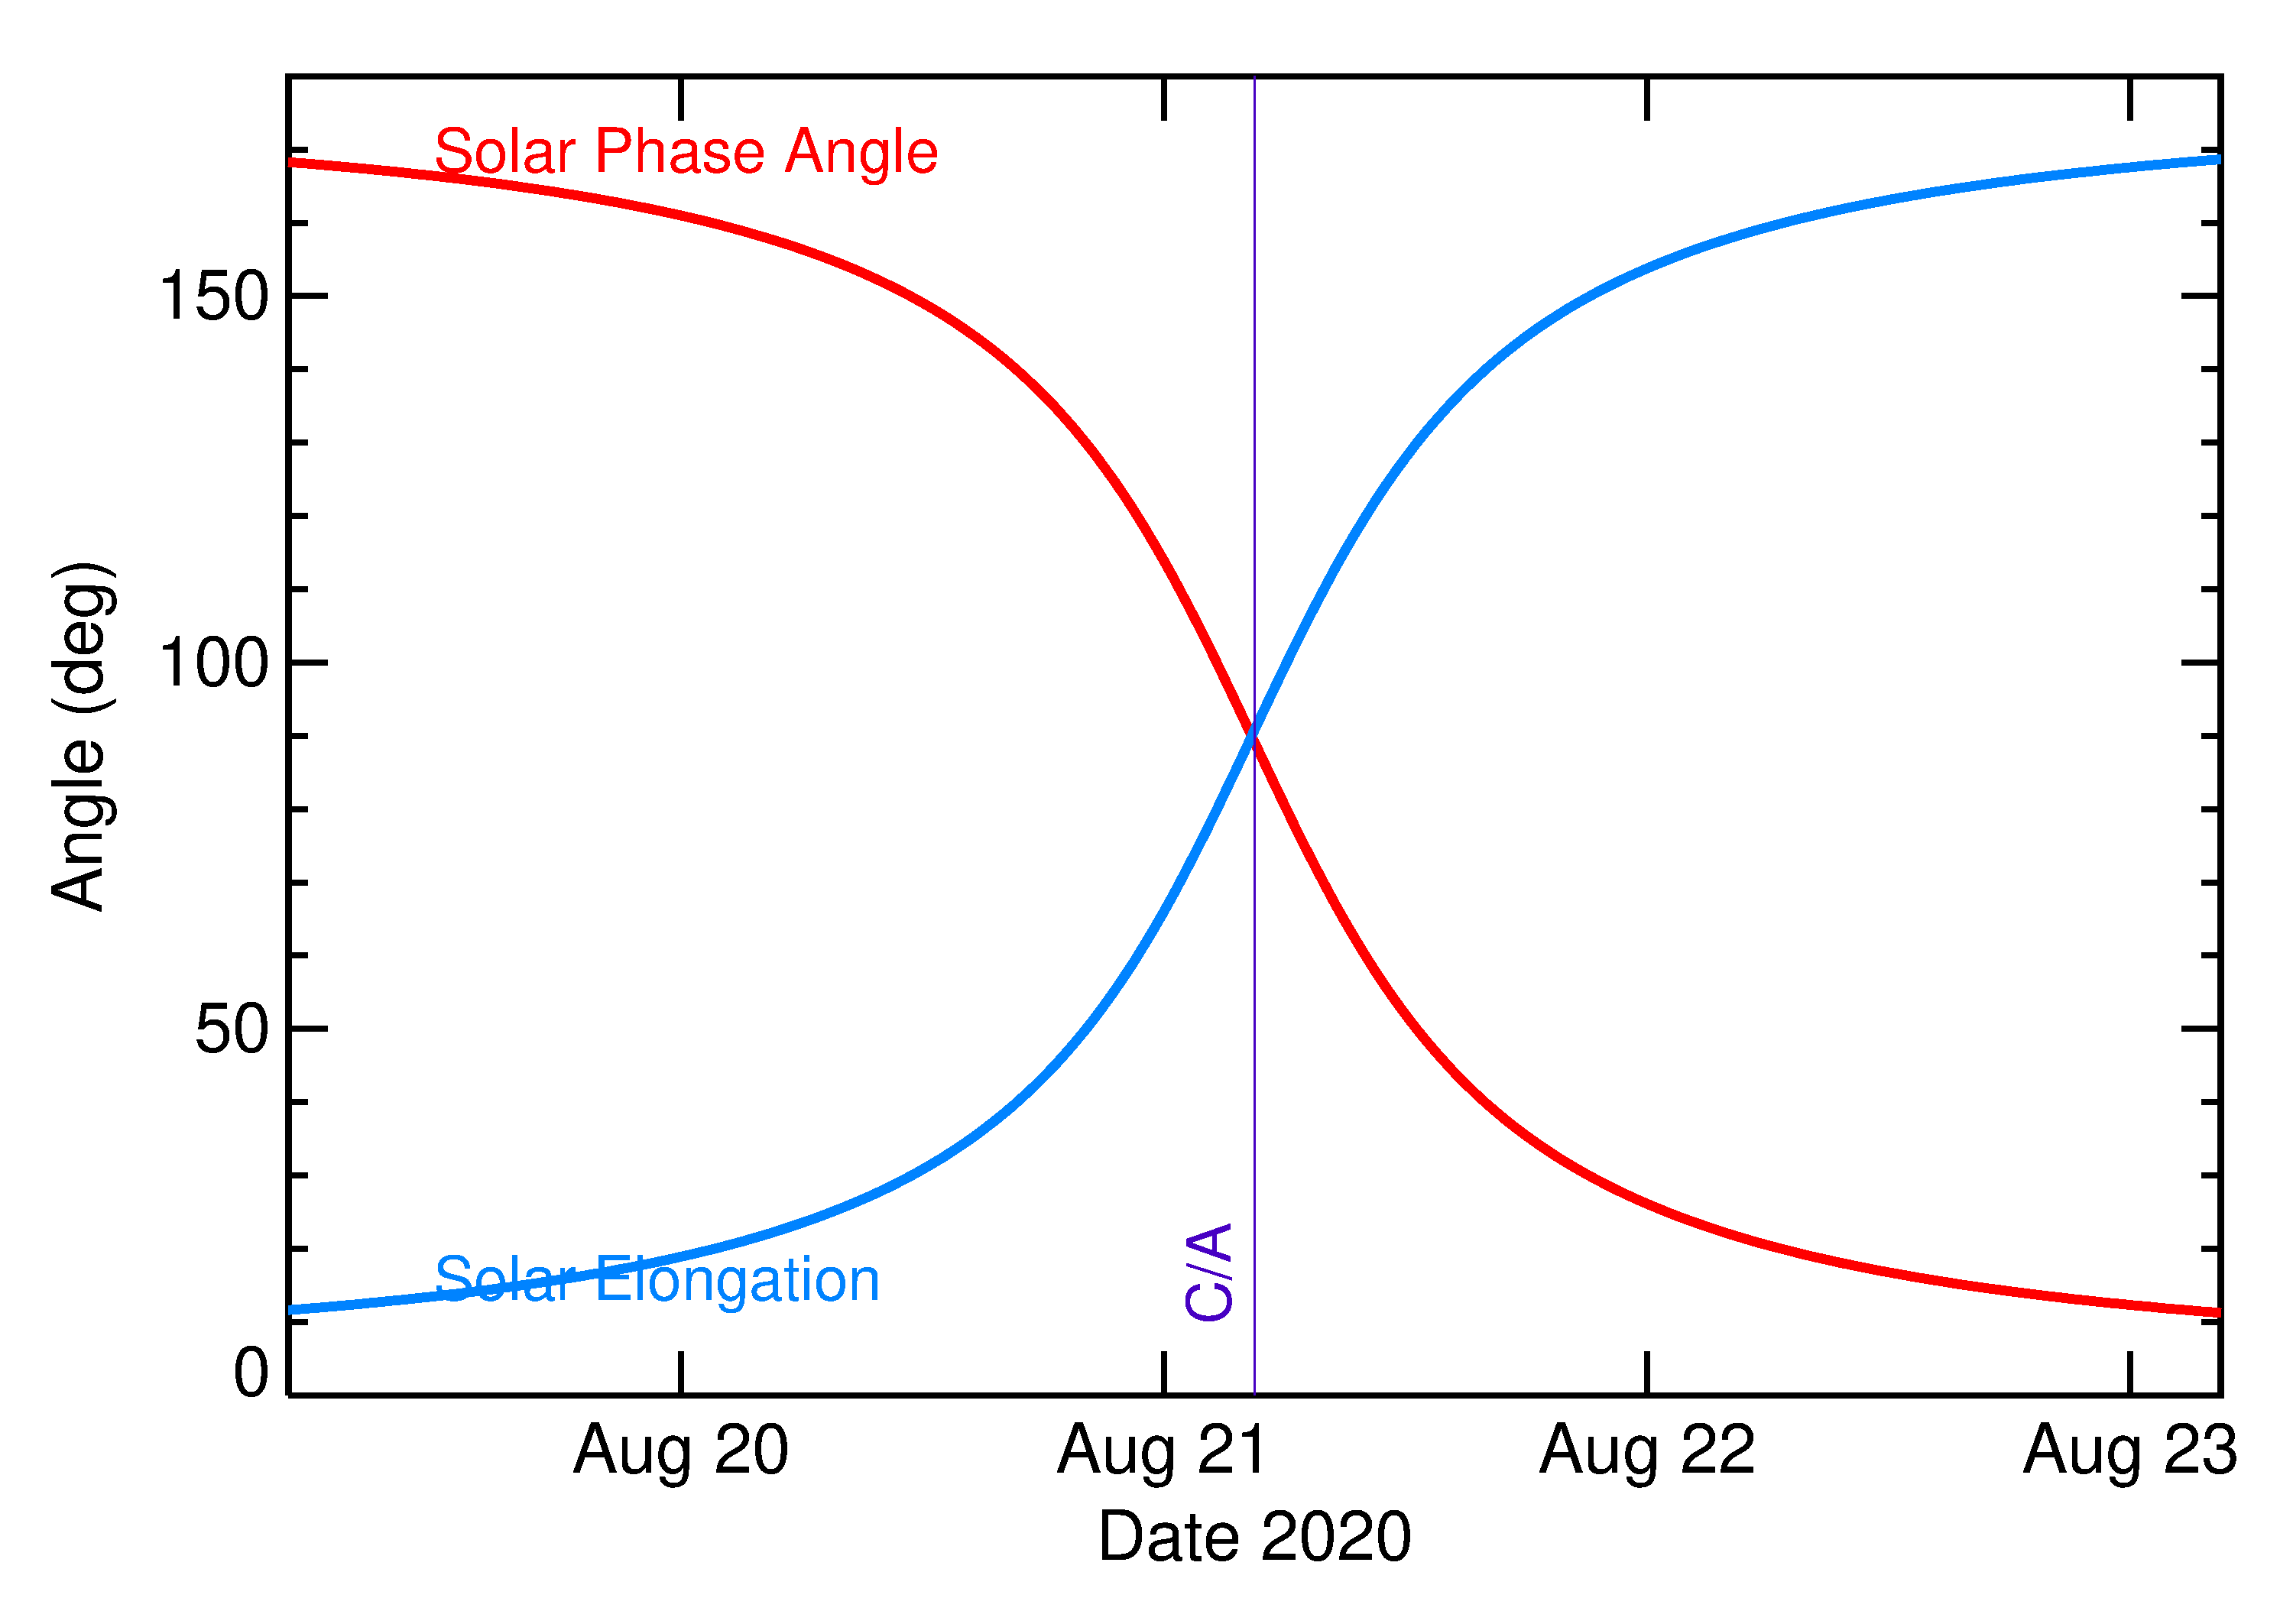 Solar Elongation and Solar Phase Angle of 2020 QN4 in the days around closest approach